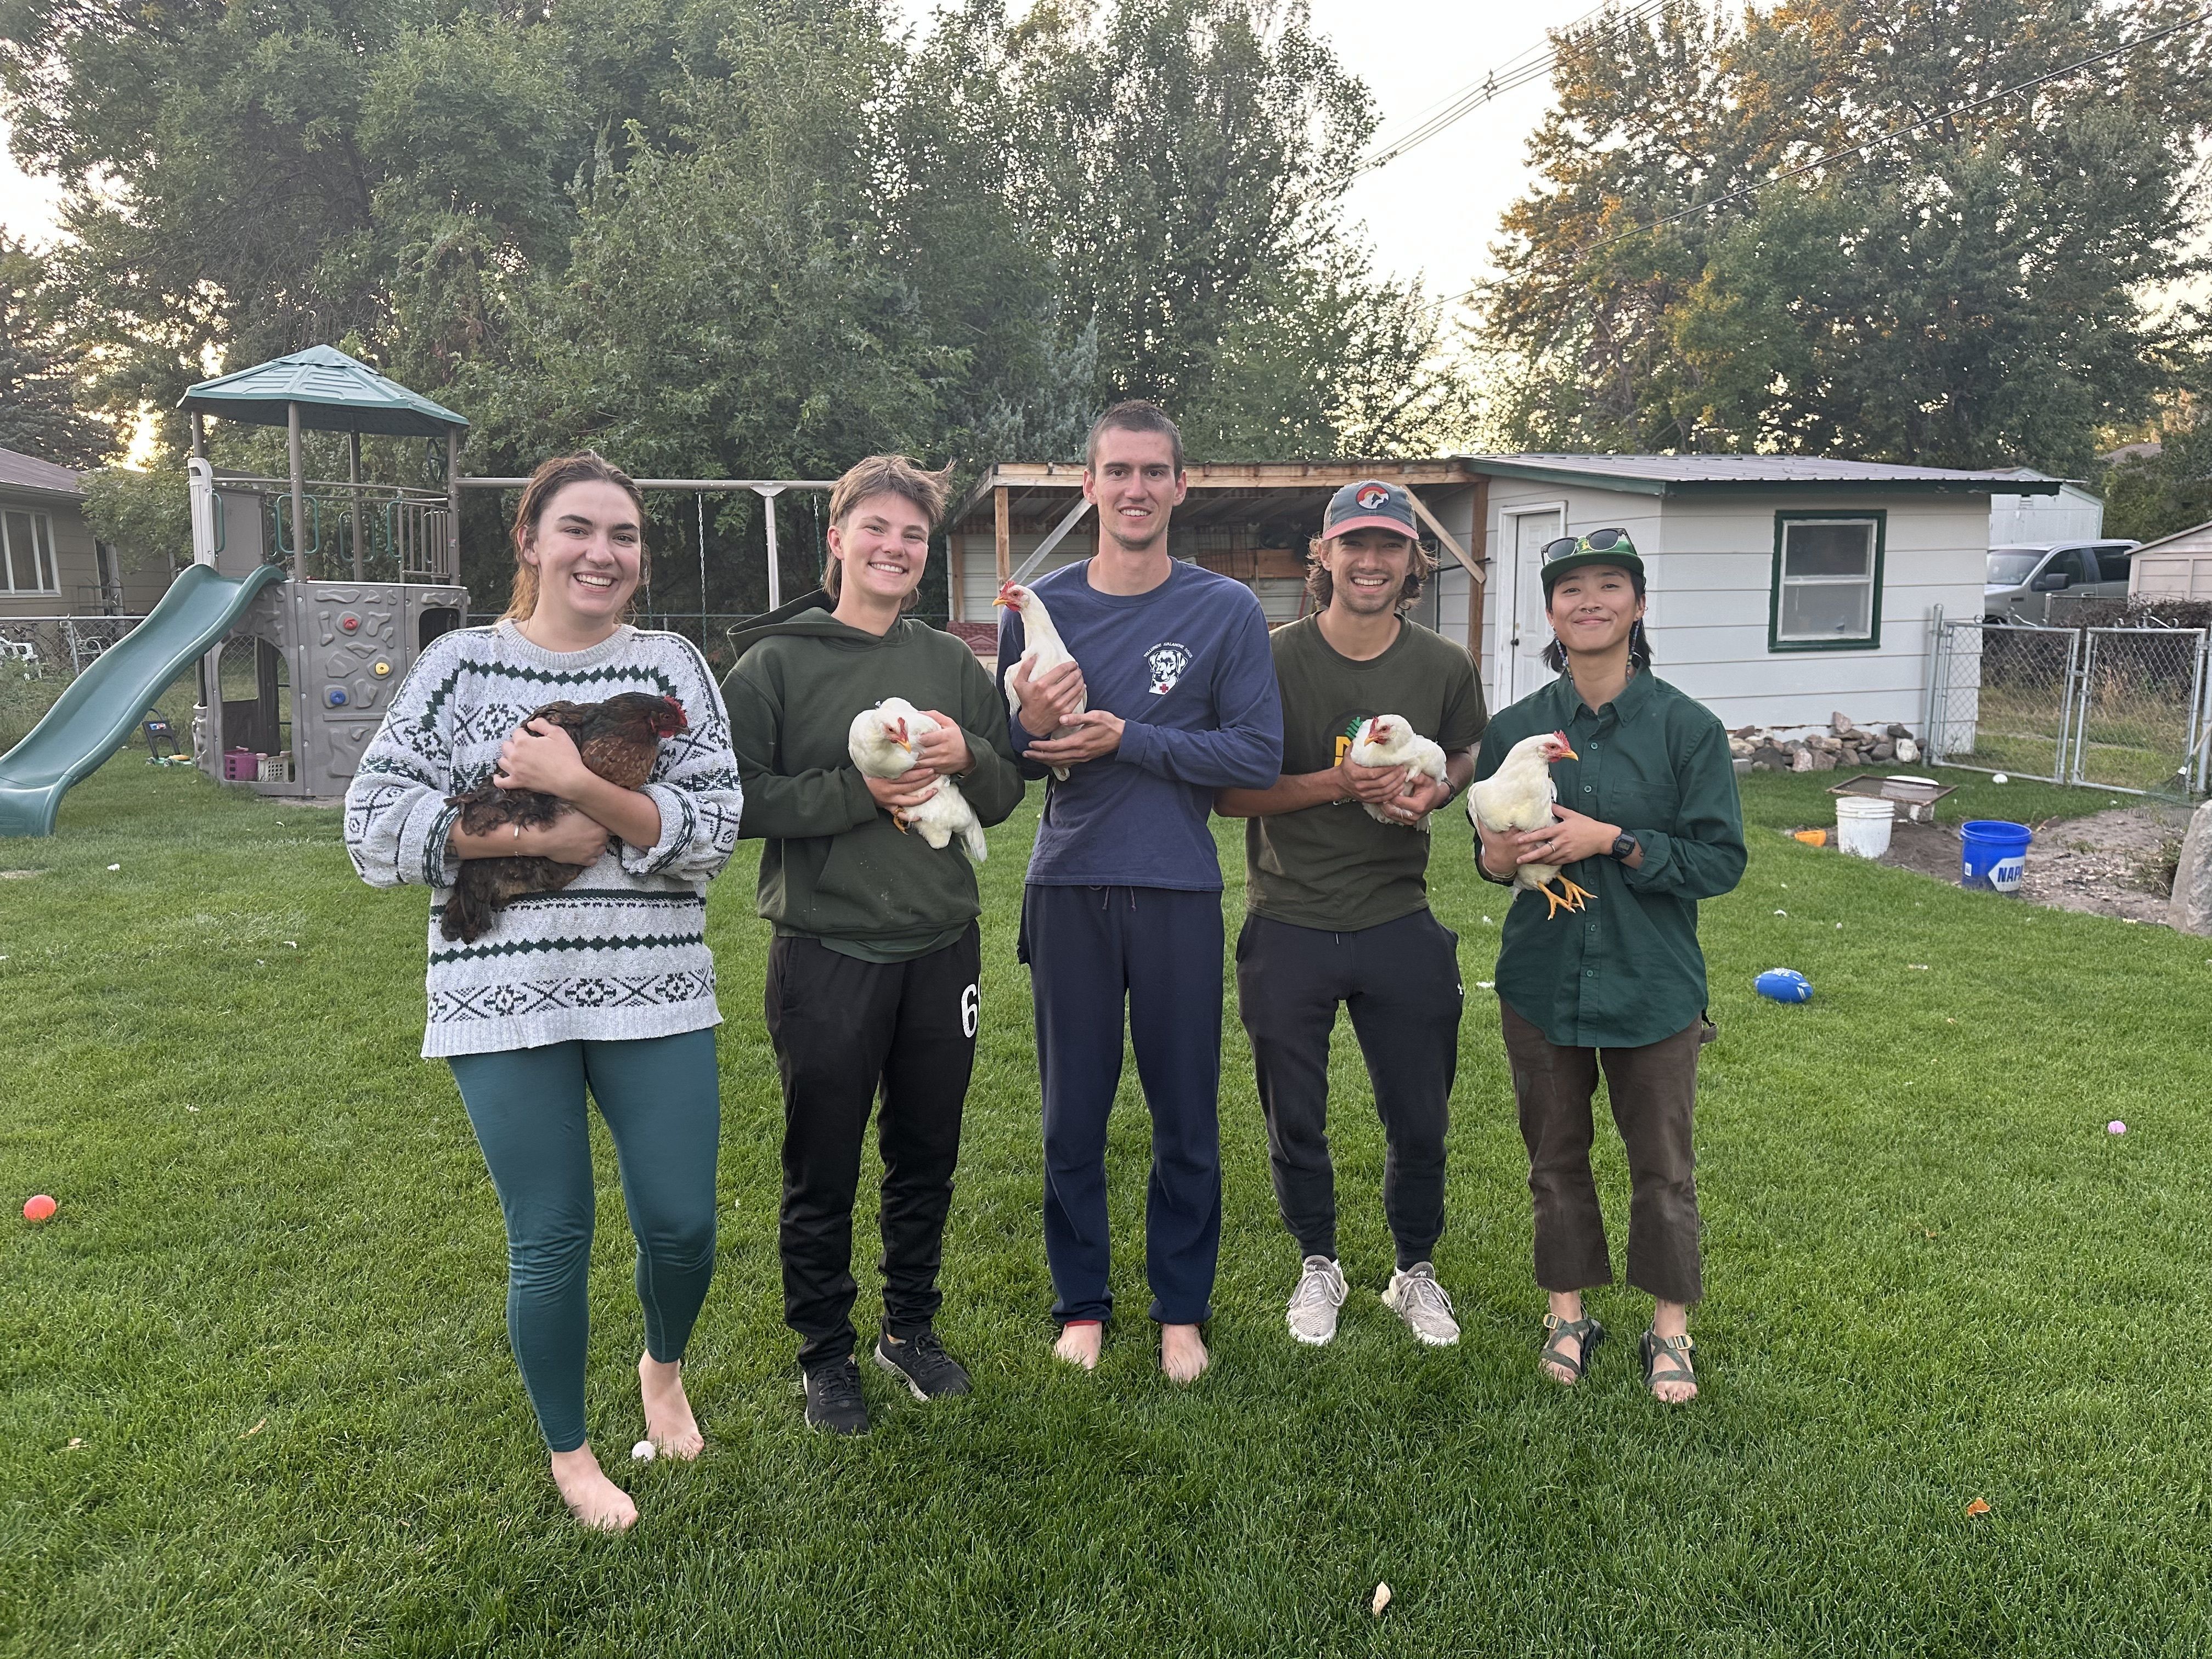 The crew stands in a backyard, holding chickens